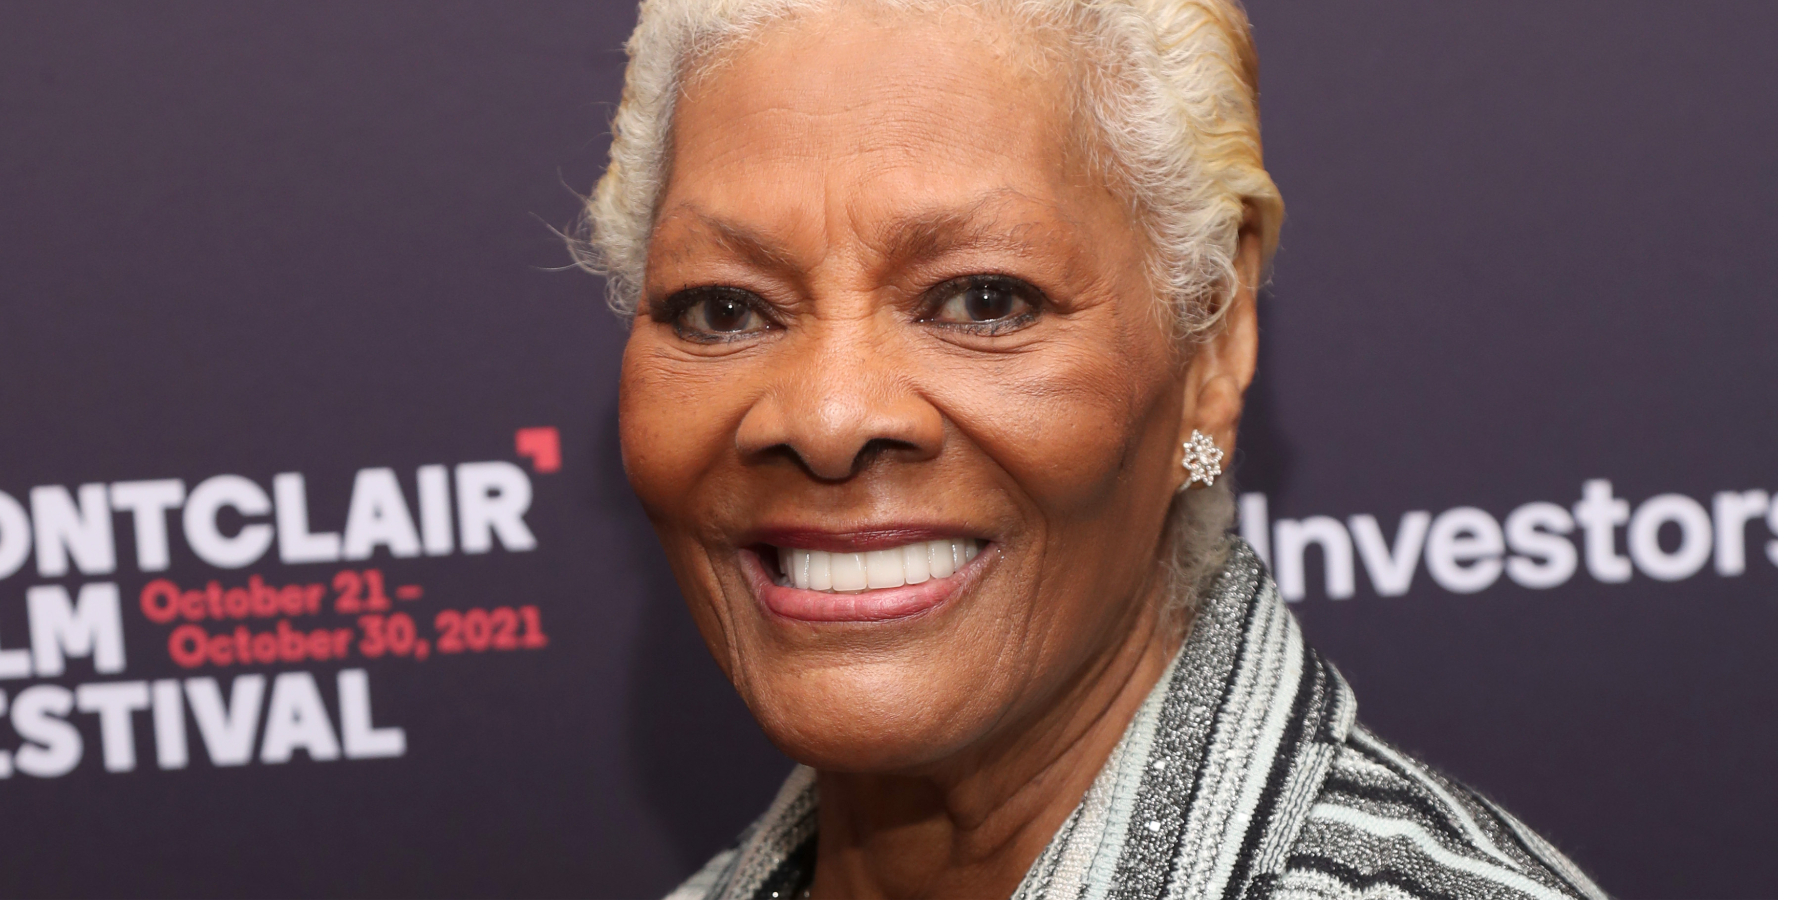 Dionne Warwick attends the Montclair Film Festival in New Jersey in 2021.